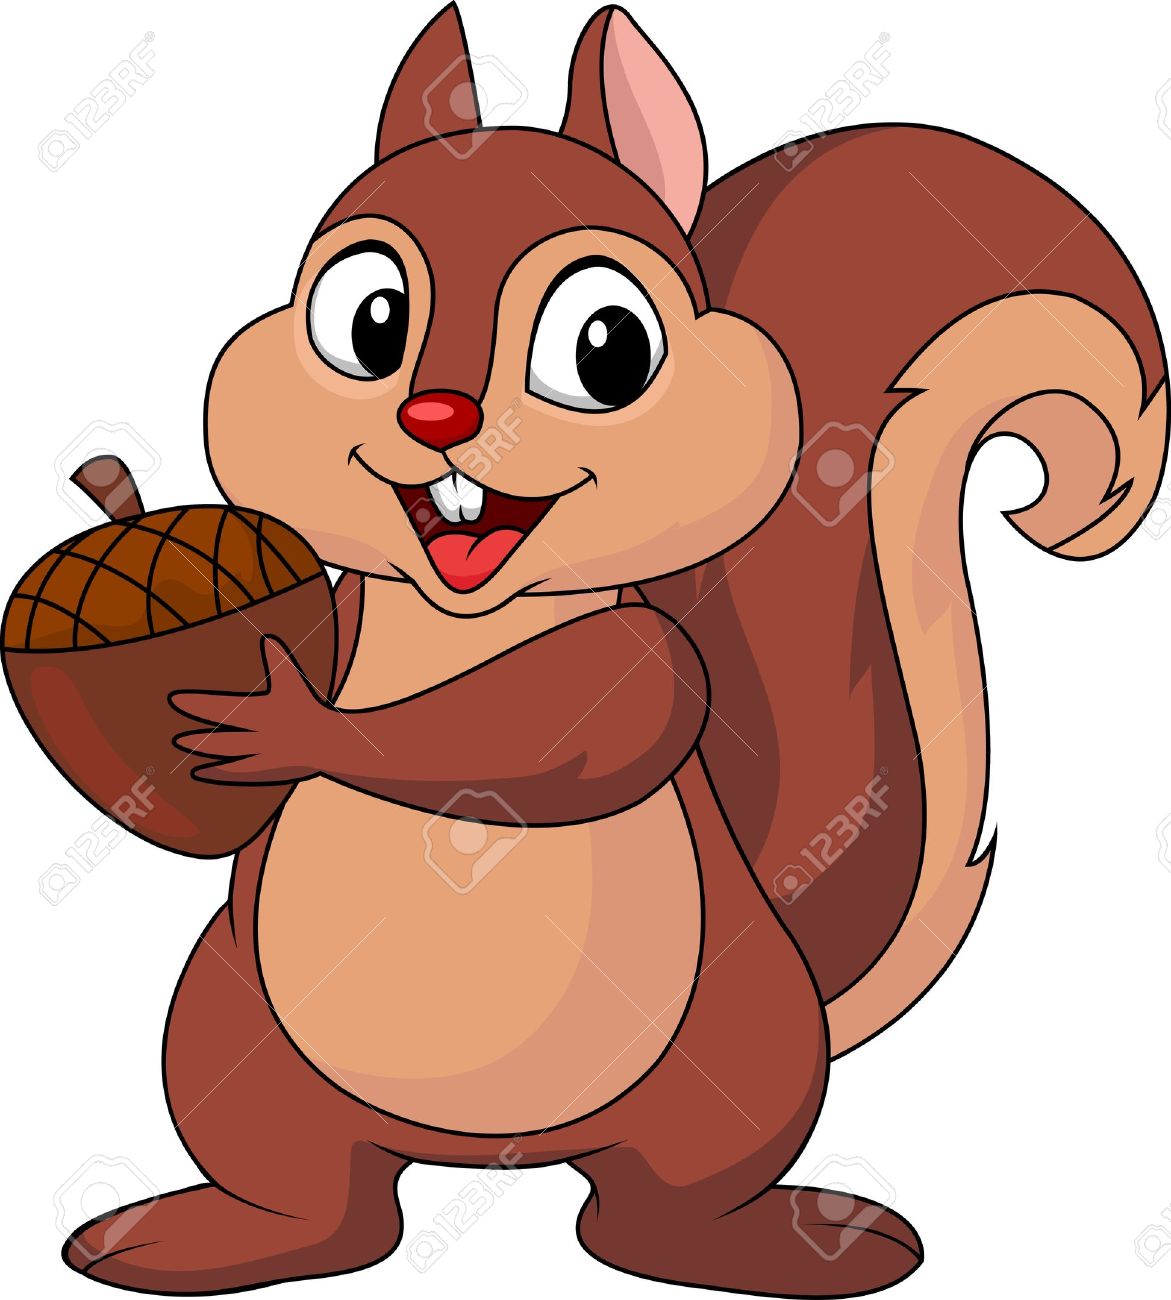 Chipmunk clipart cute. Free download best on